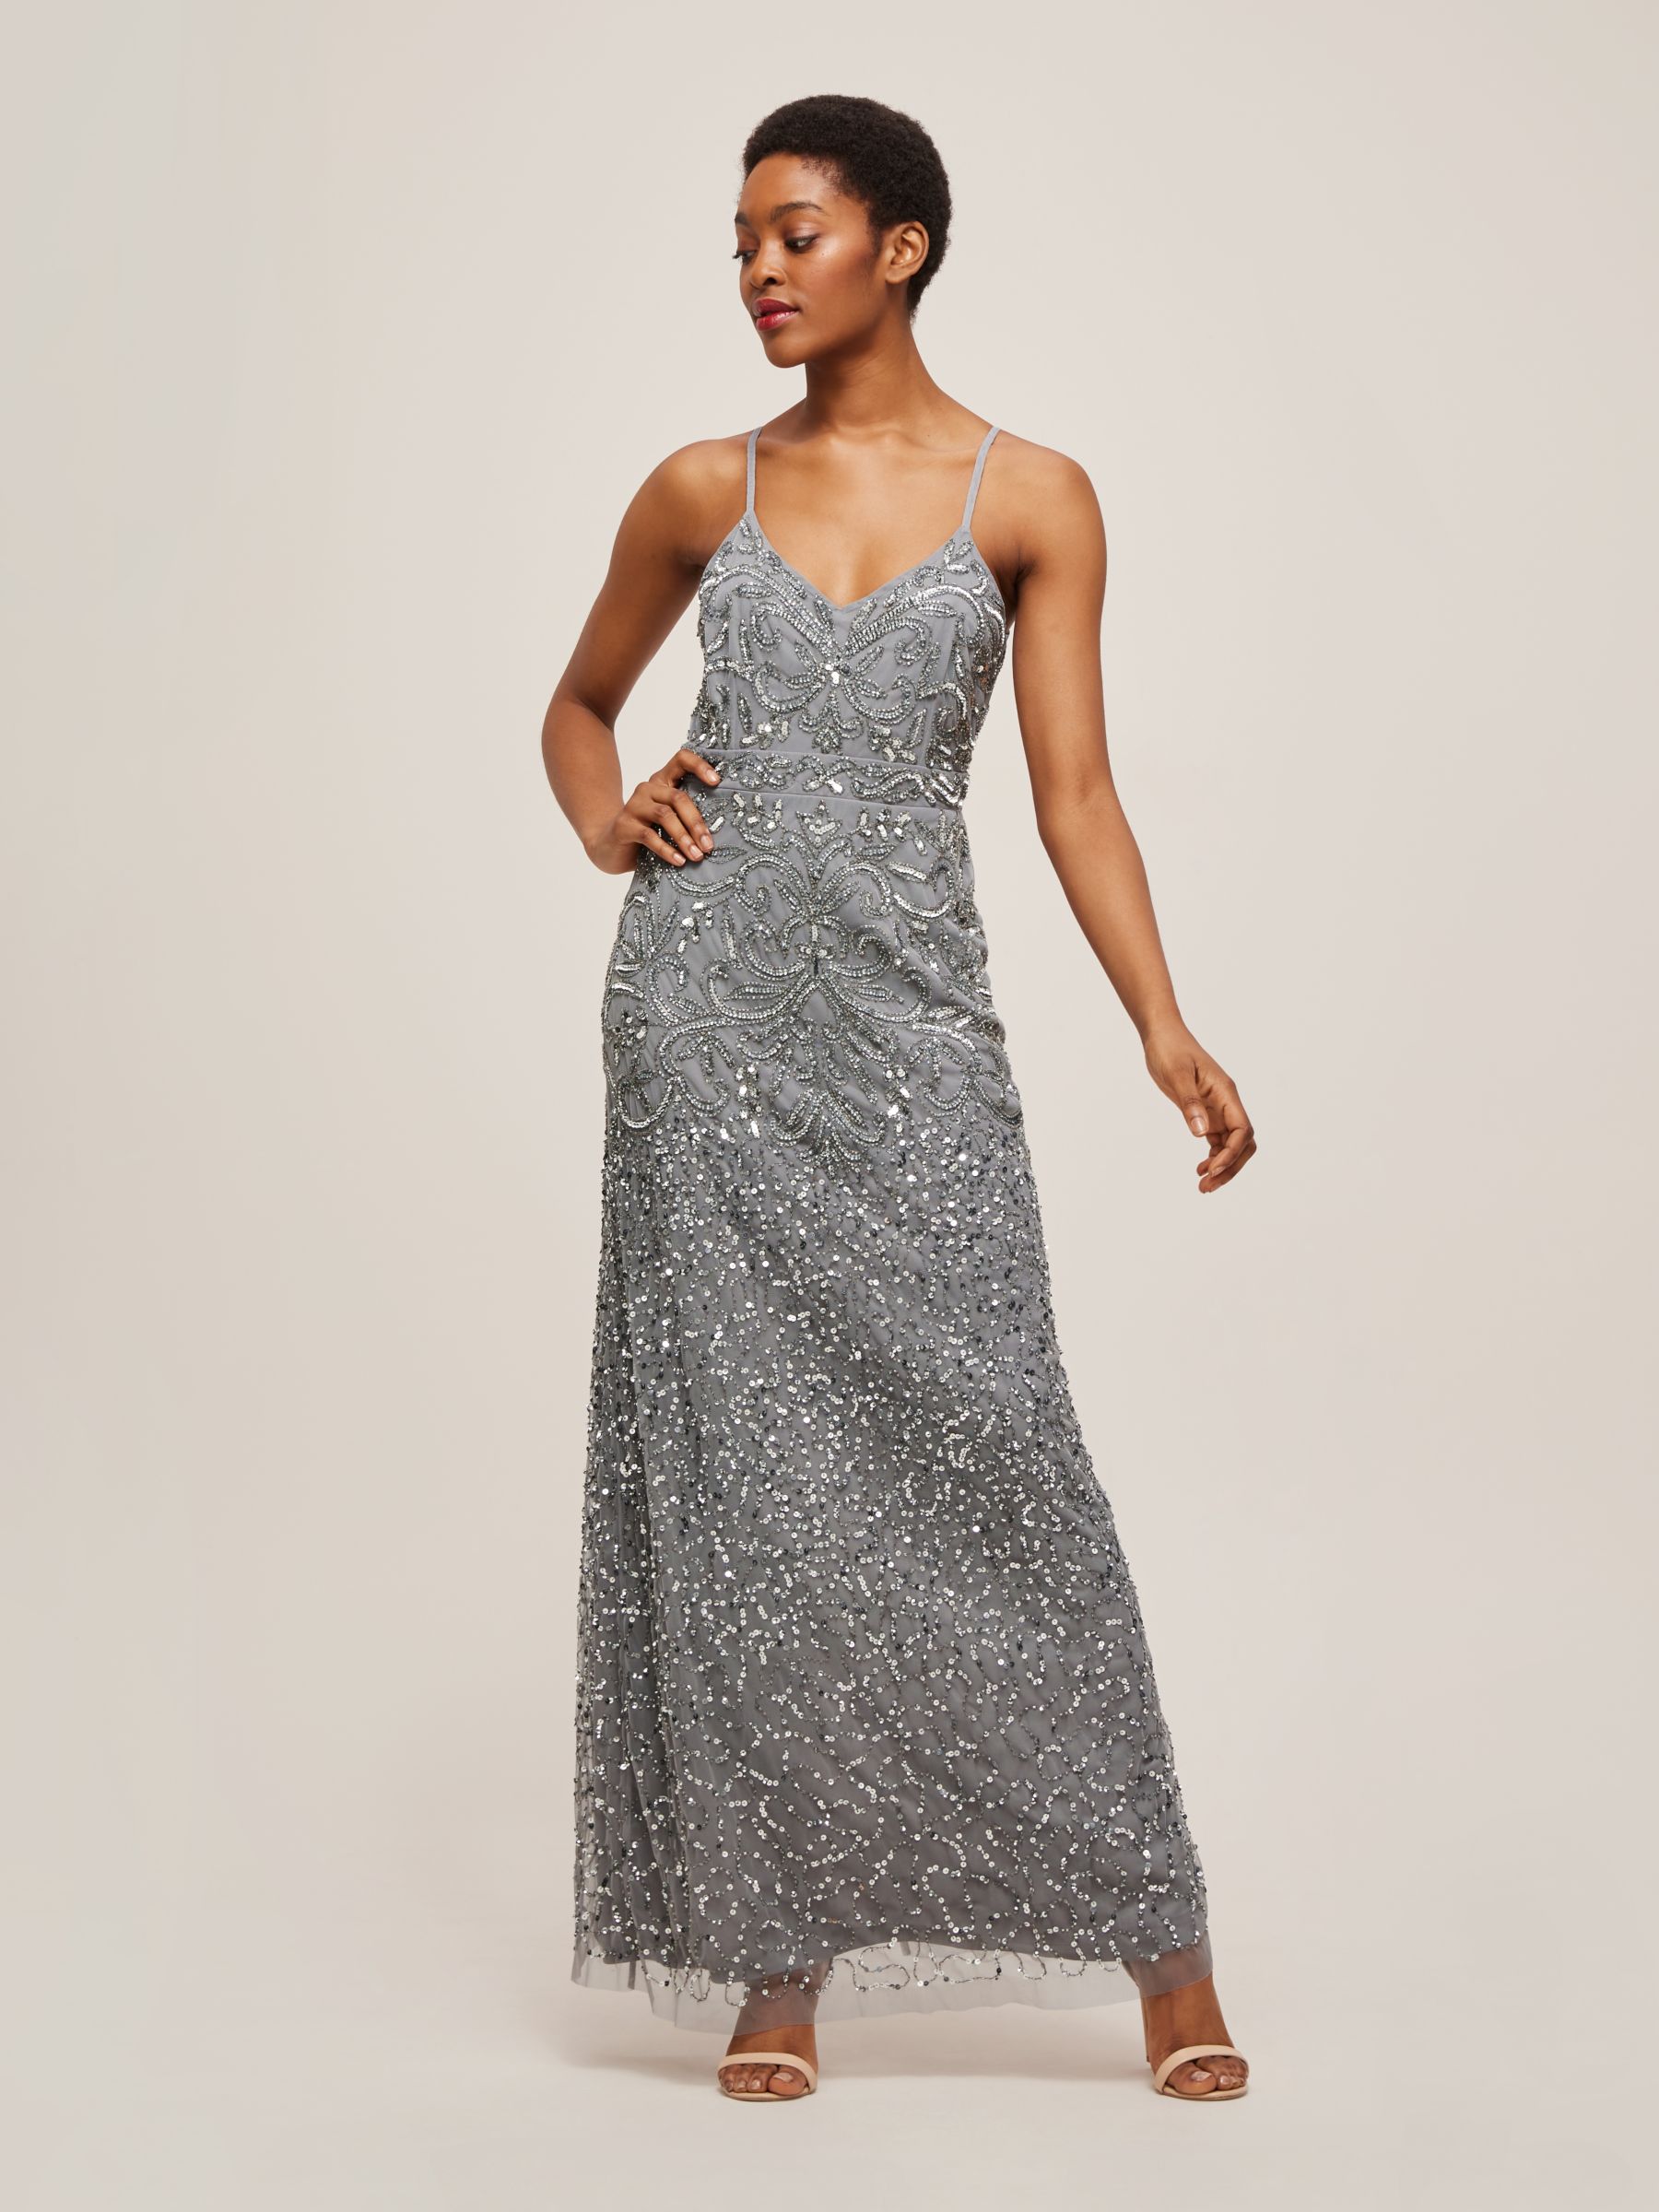 Lace & Beads Fiona Sequin Embellished Maxi Dress